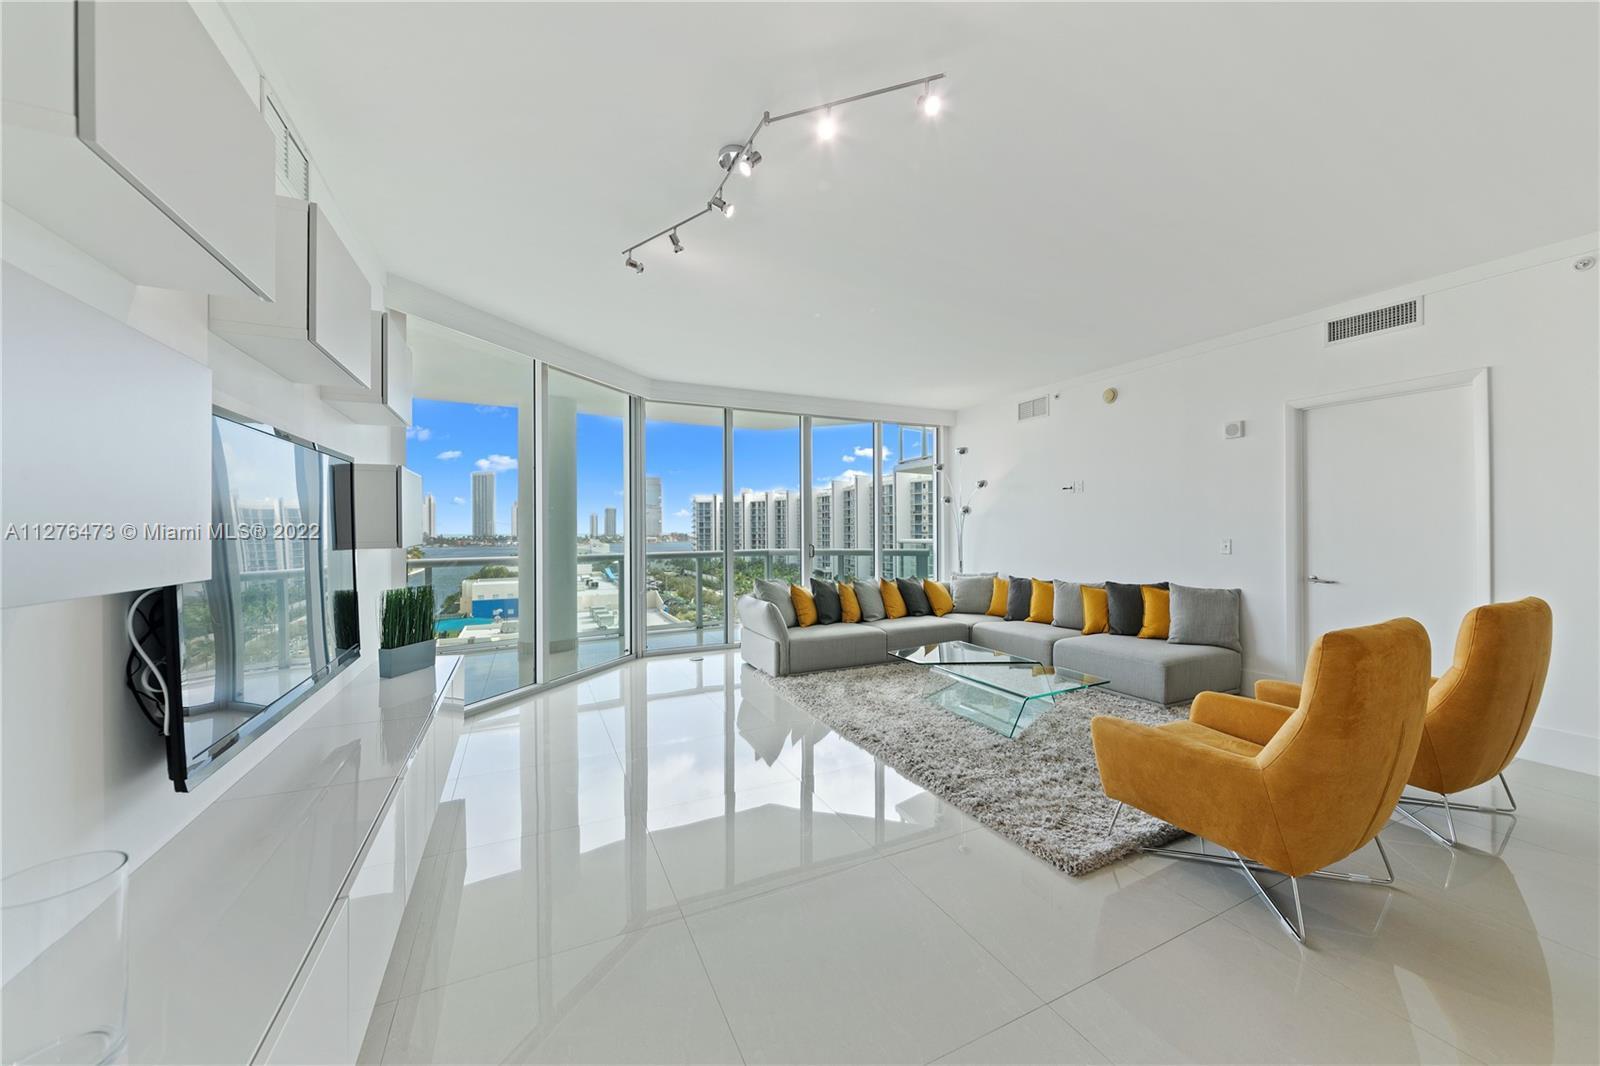 HIGHLY UPGRADED MODERN WATERFRONT CONDO IN THE HEART OF AVENTURA. THIS 2 BEDROOM/2.5 BATHROOM UNIT I